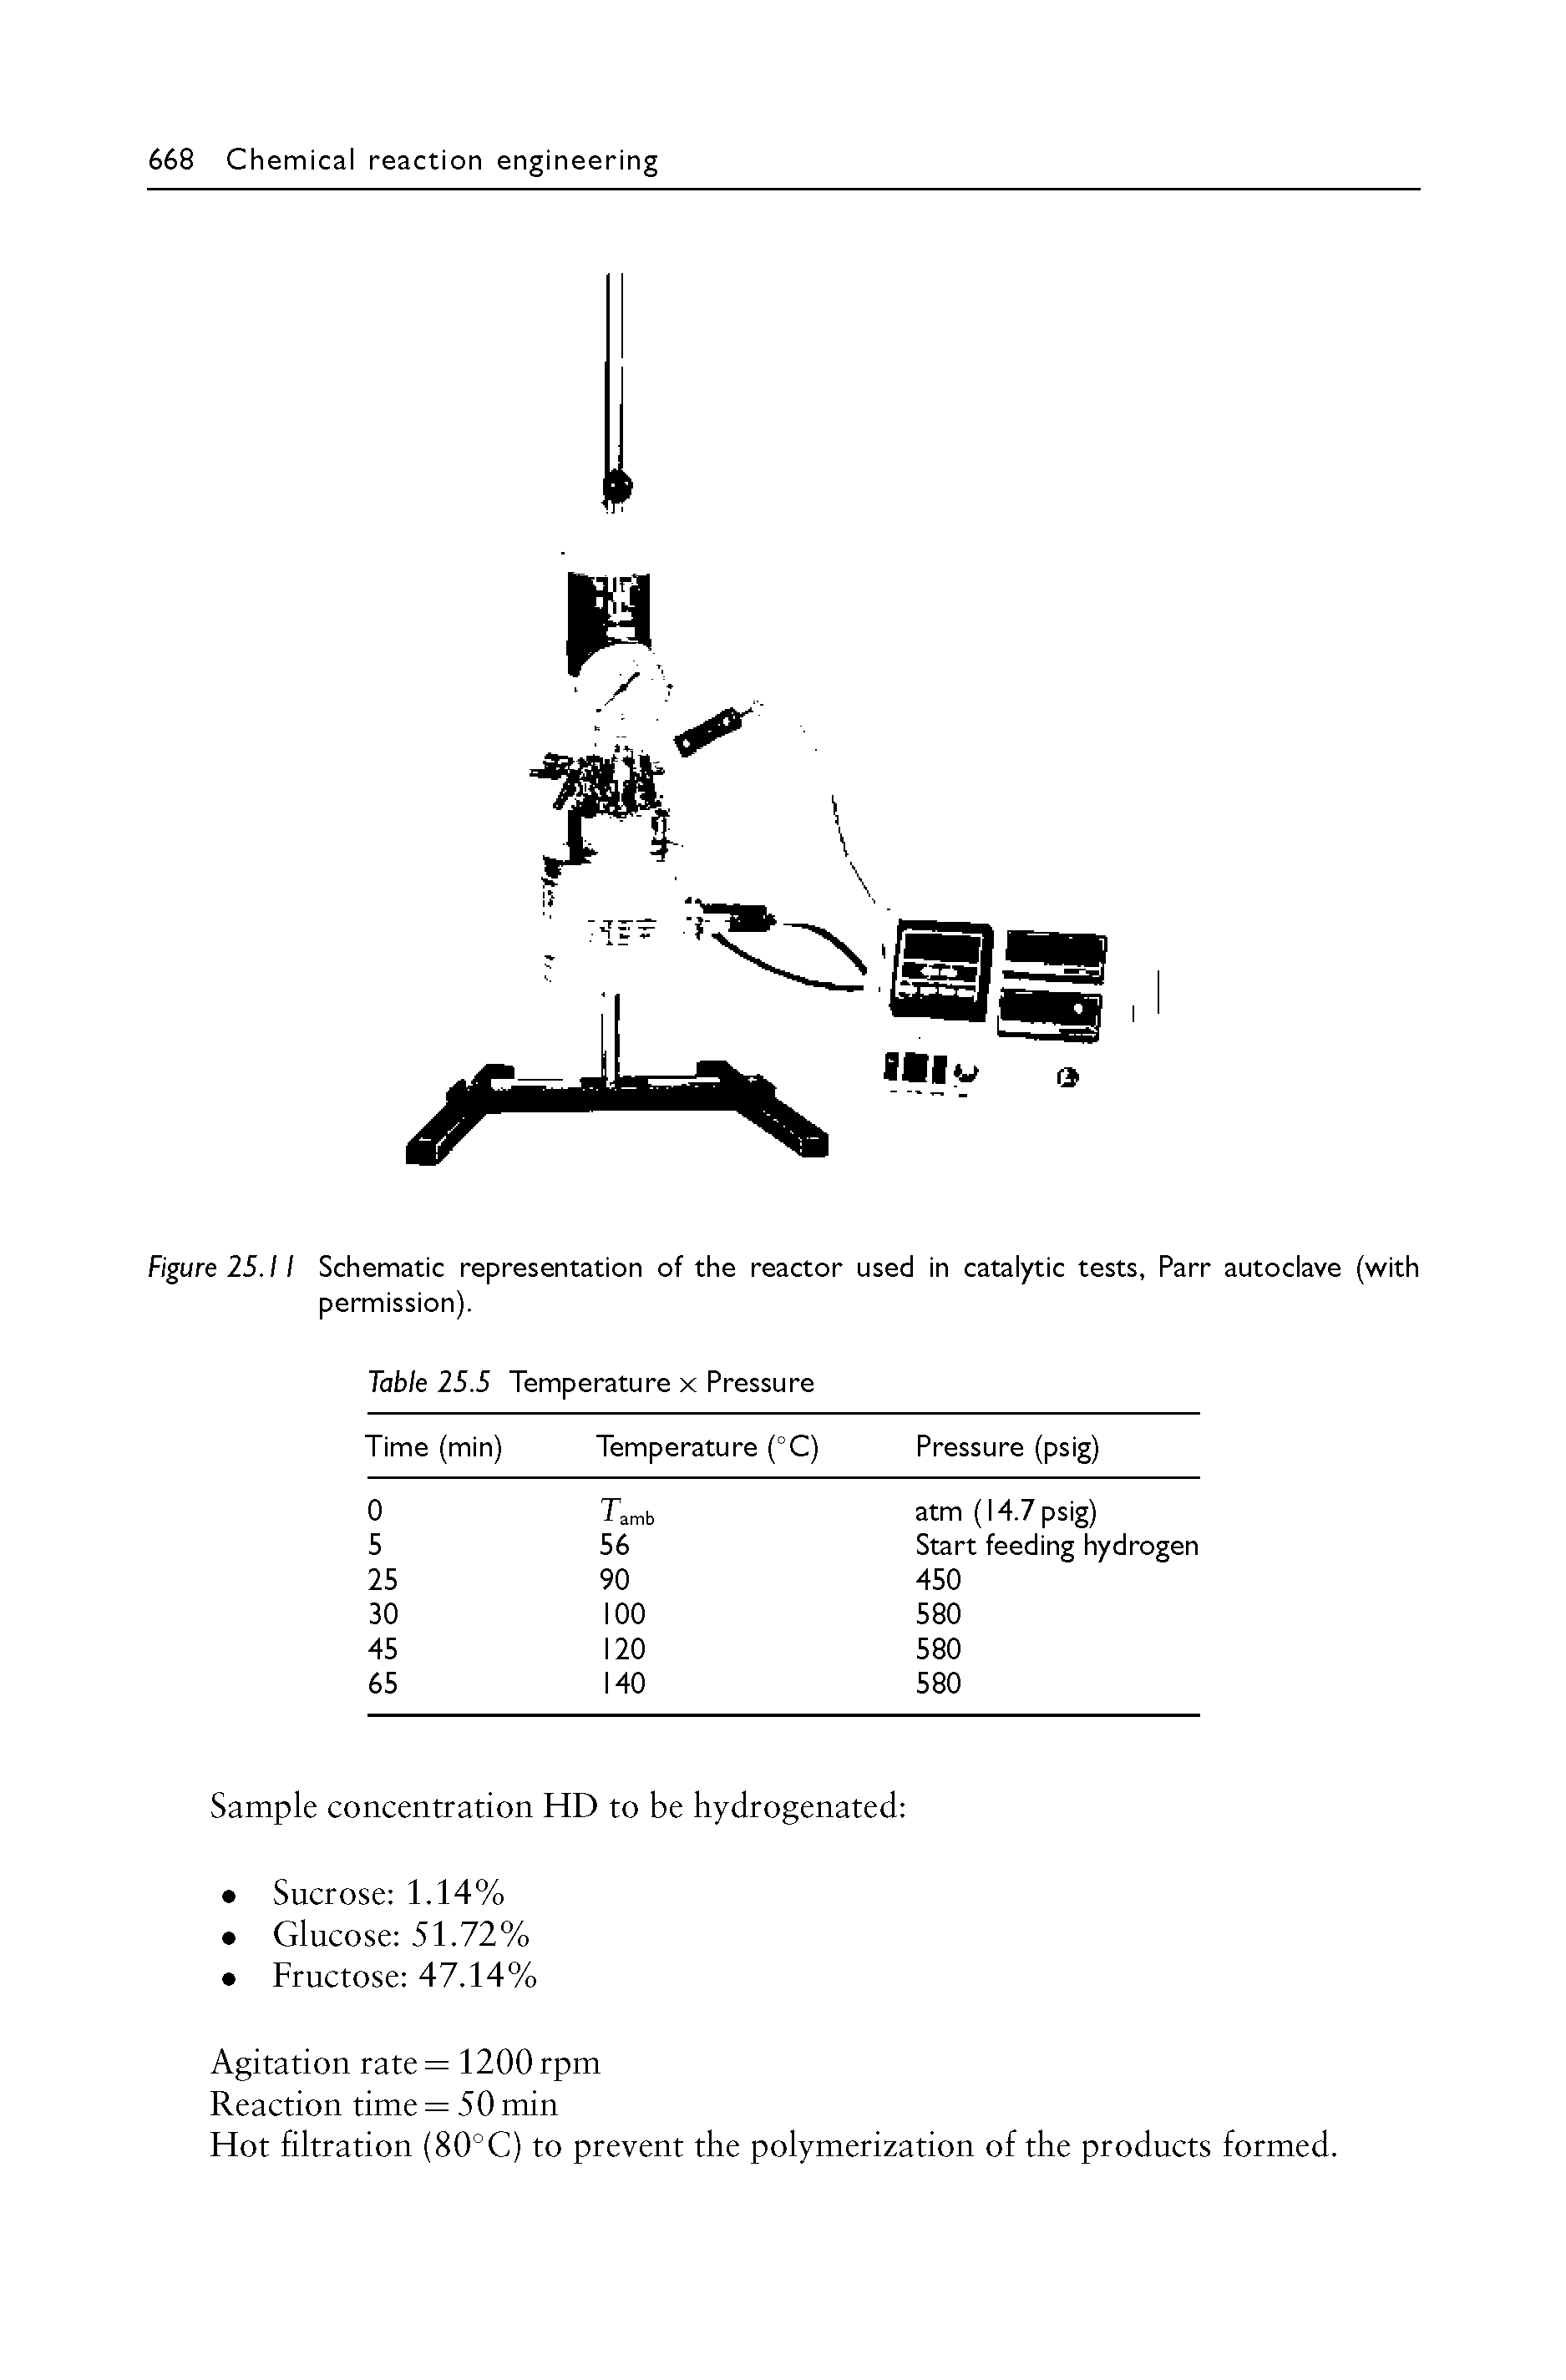 Figure 25.11 Schematic representation of the reactor used in catalytic tests, Parr autoclave (with permission).